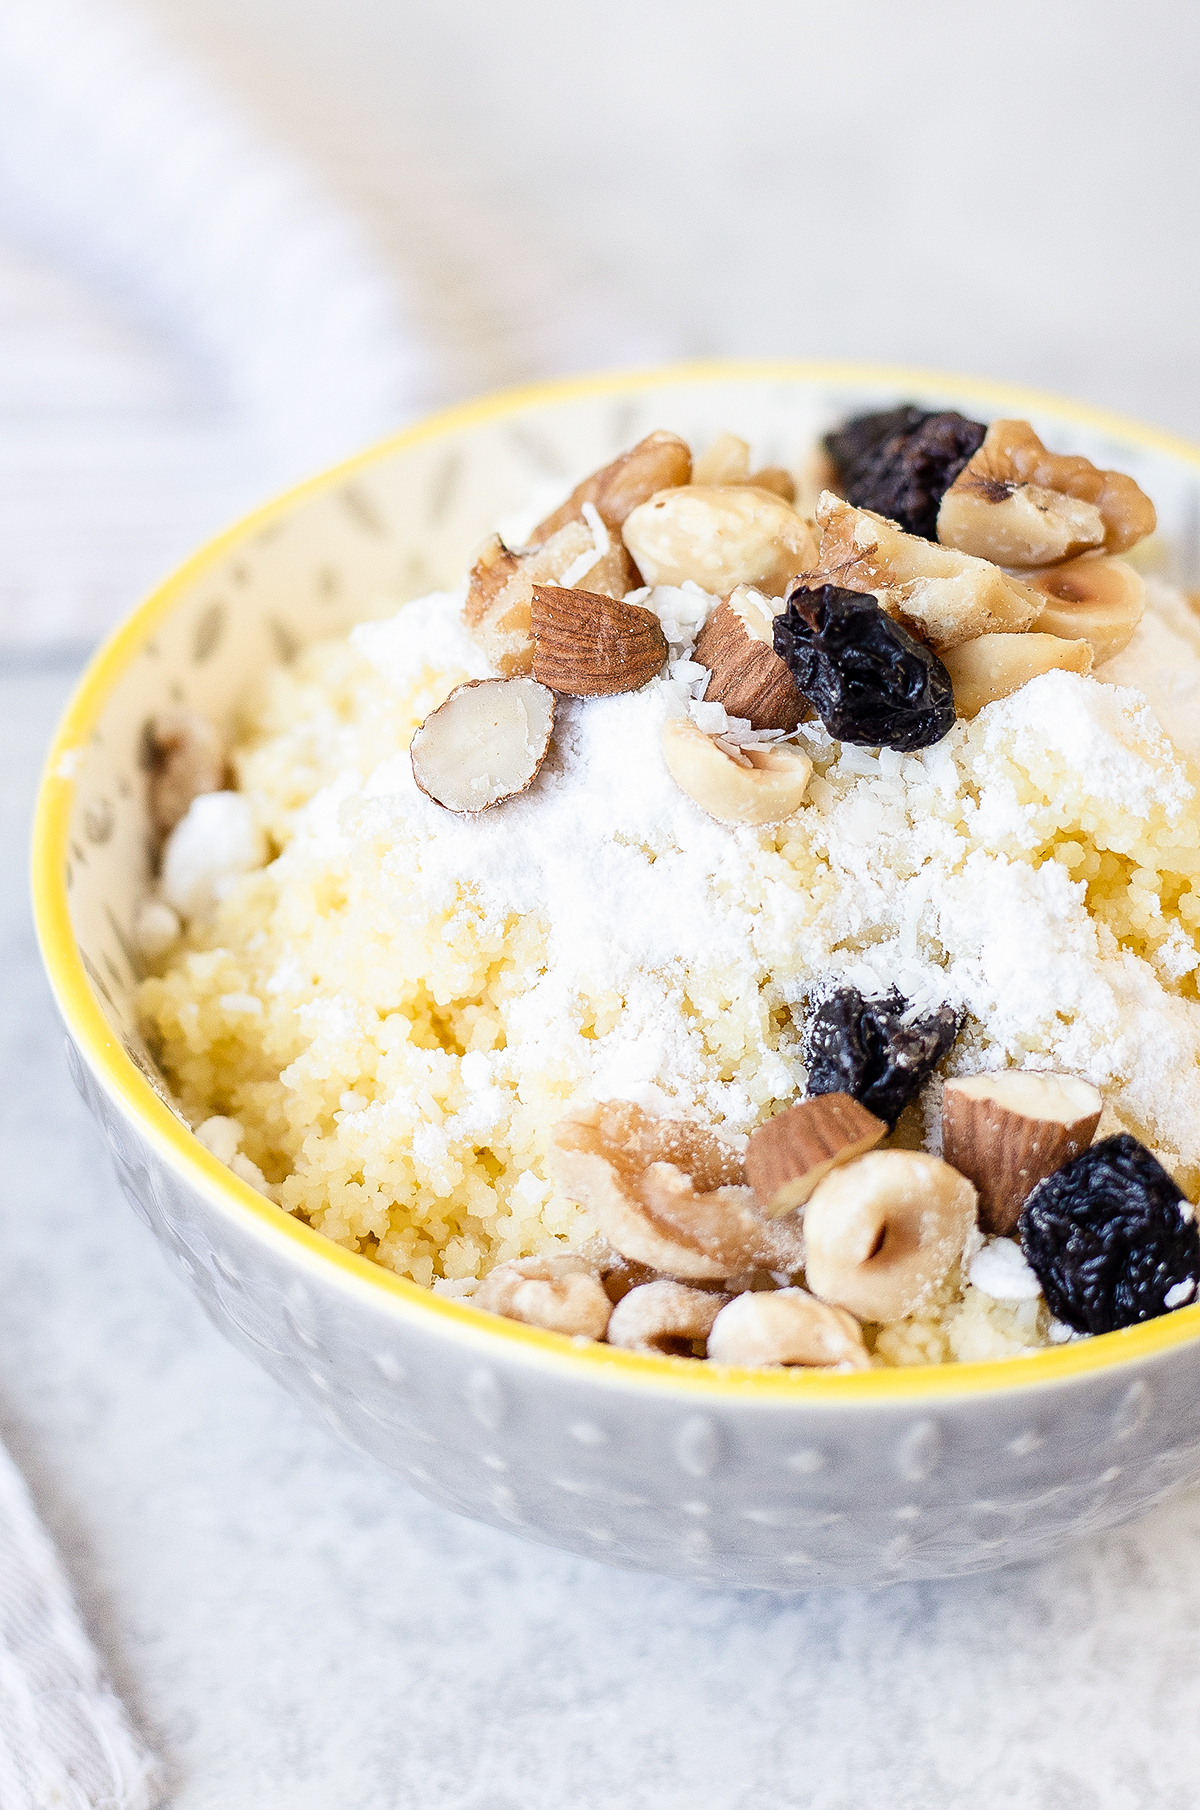 Sweet Couscous with butter, nuts, and powdered sugar